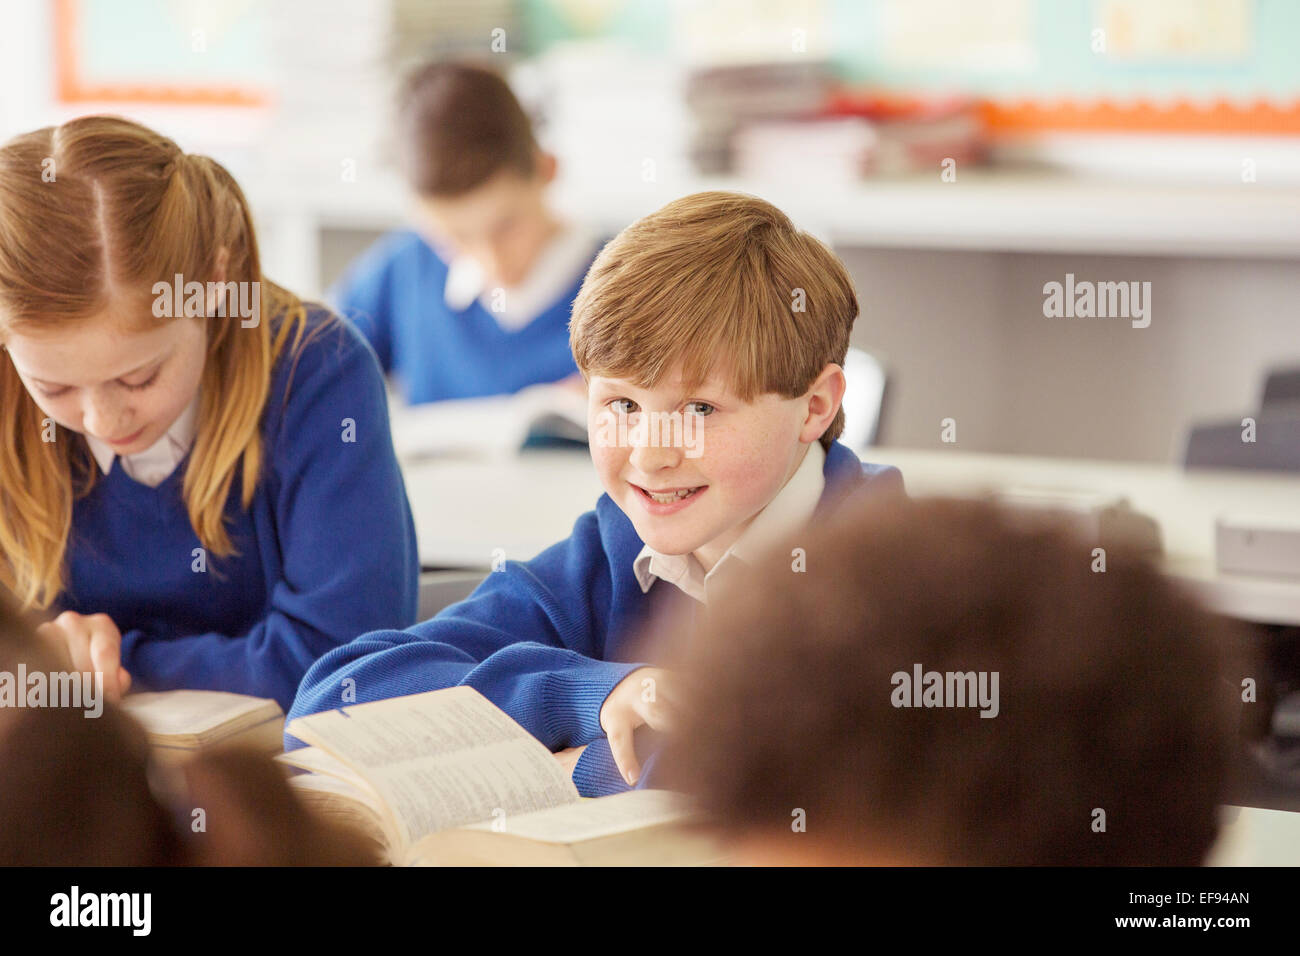 Elementary school children in classroom during lesson Stock Photo